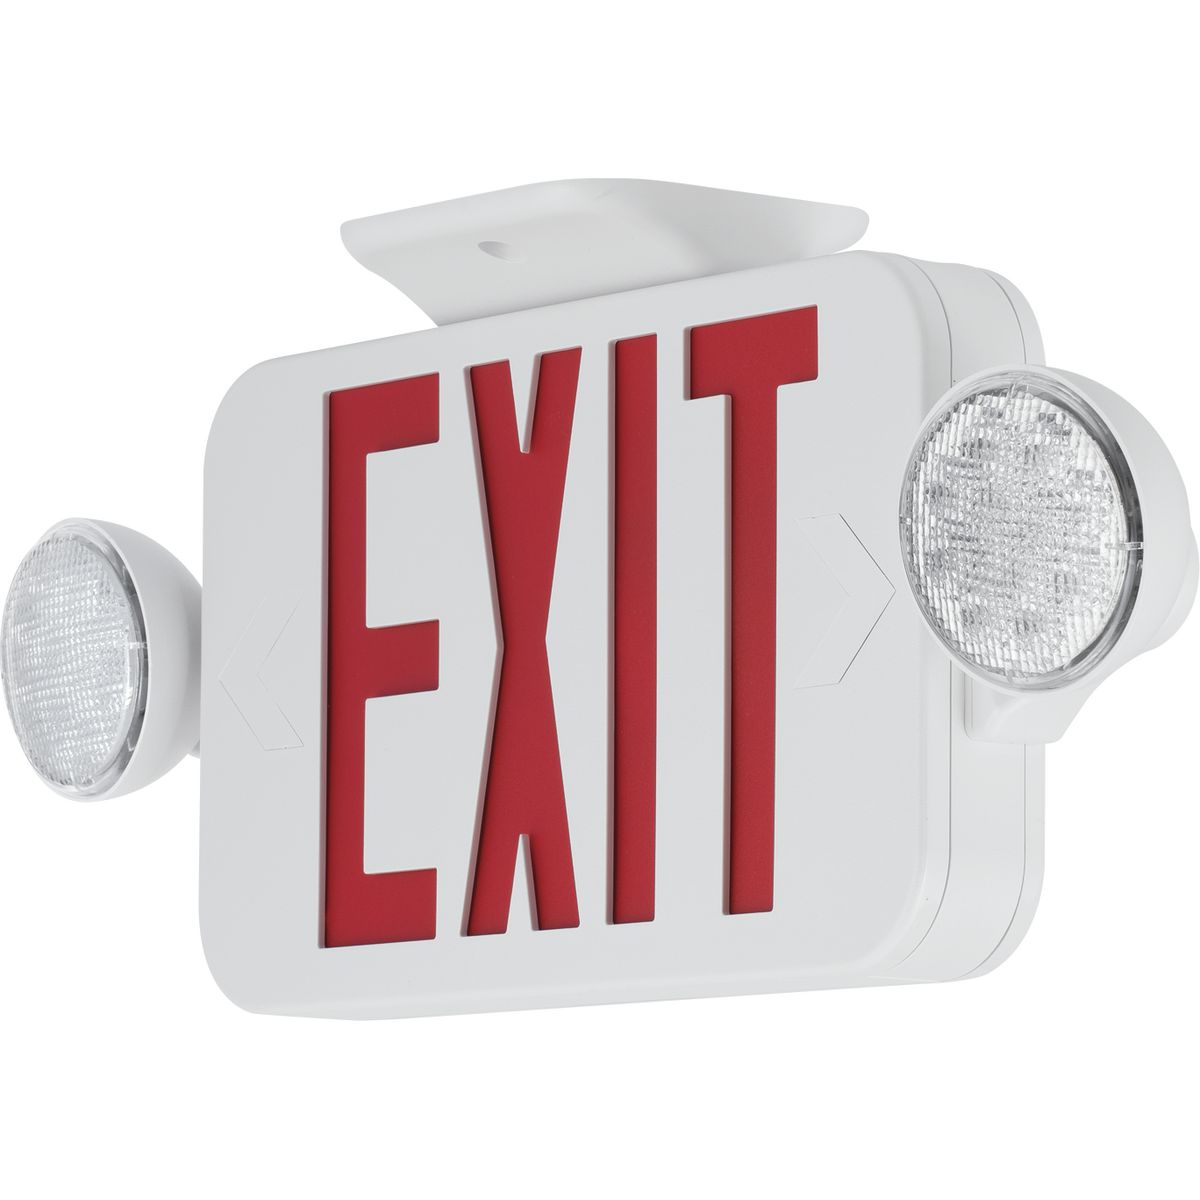 LED Exit Sign Combo, Face style: Universal, Color: White, Number of Lamps: 2, Voltage Rating: Dual-voltage 120 or 277 VAC. The PECUE Series can be applied in stair-wells, hallways, offices and other commercial applications. Red lettering.